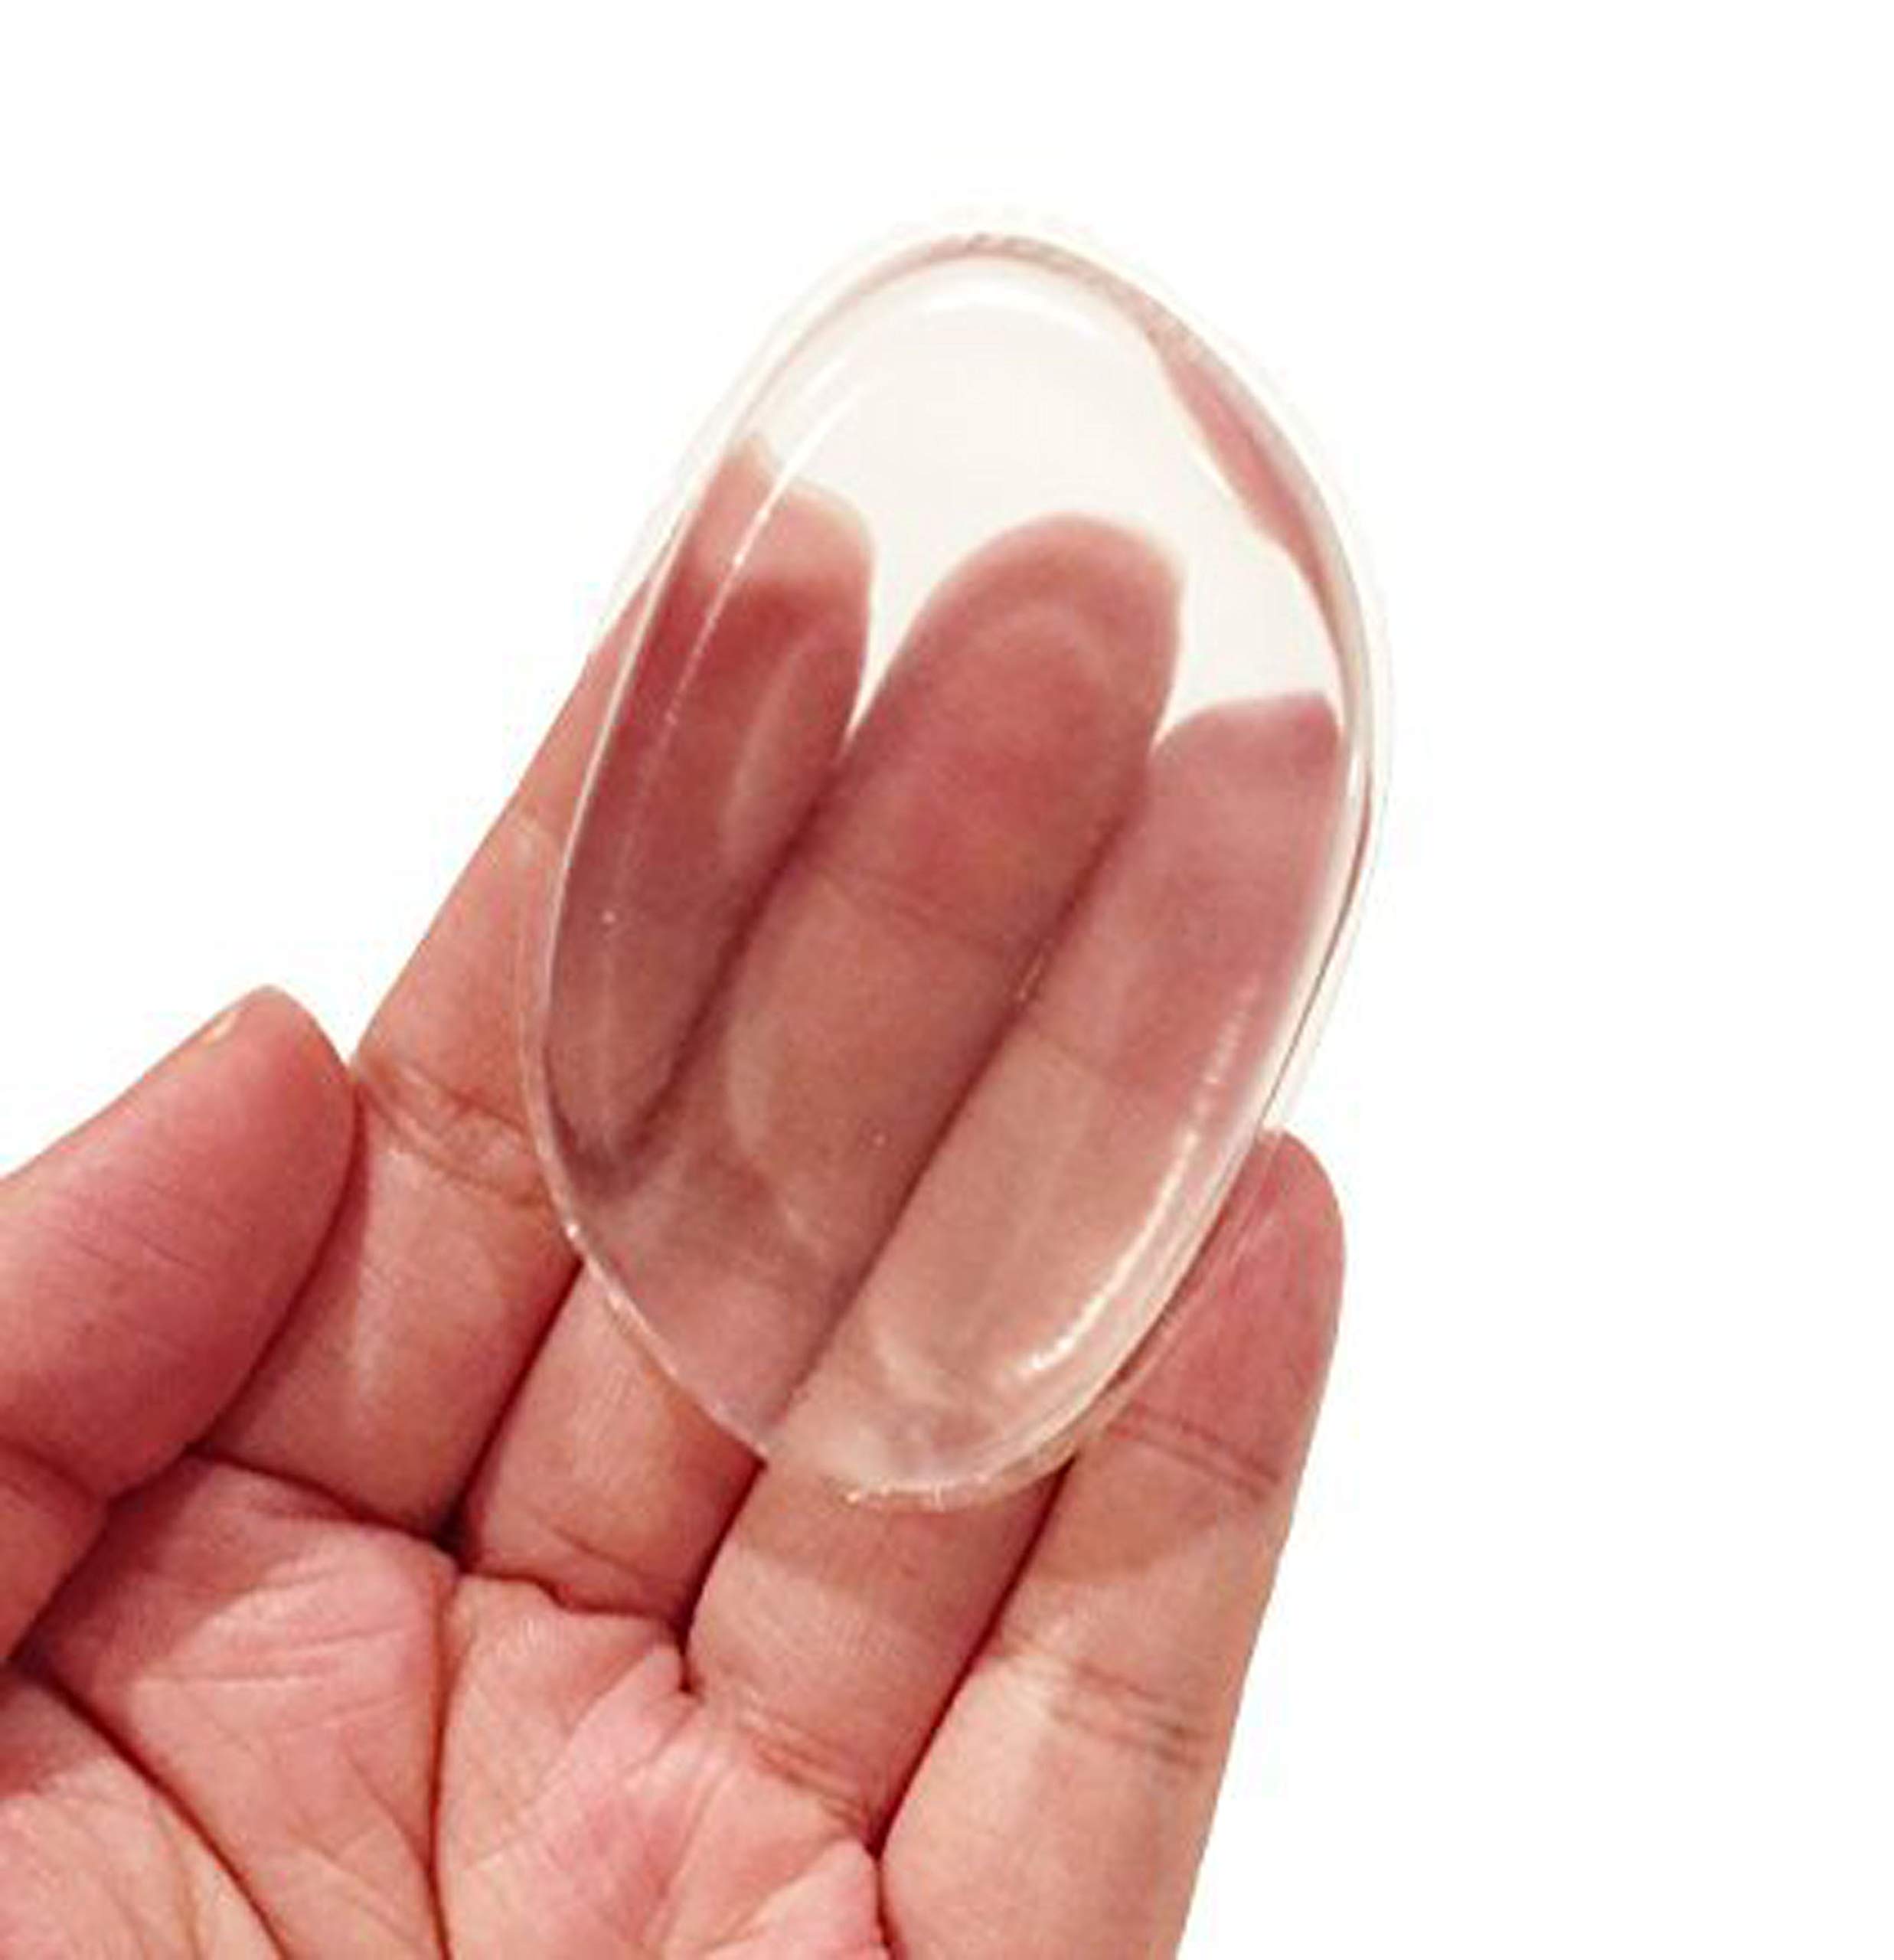 Clear Silicone Makeup Applicator Sponge Perfect for BB CC Cream Foundation Concealer Blending Air Cushion Cosmetics Blender (3 Clear Silisponges)